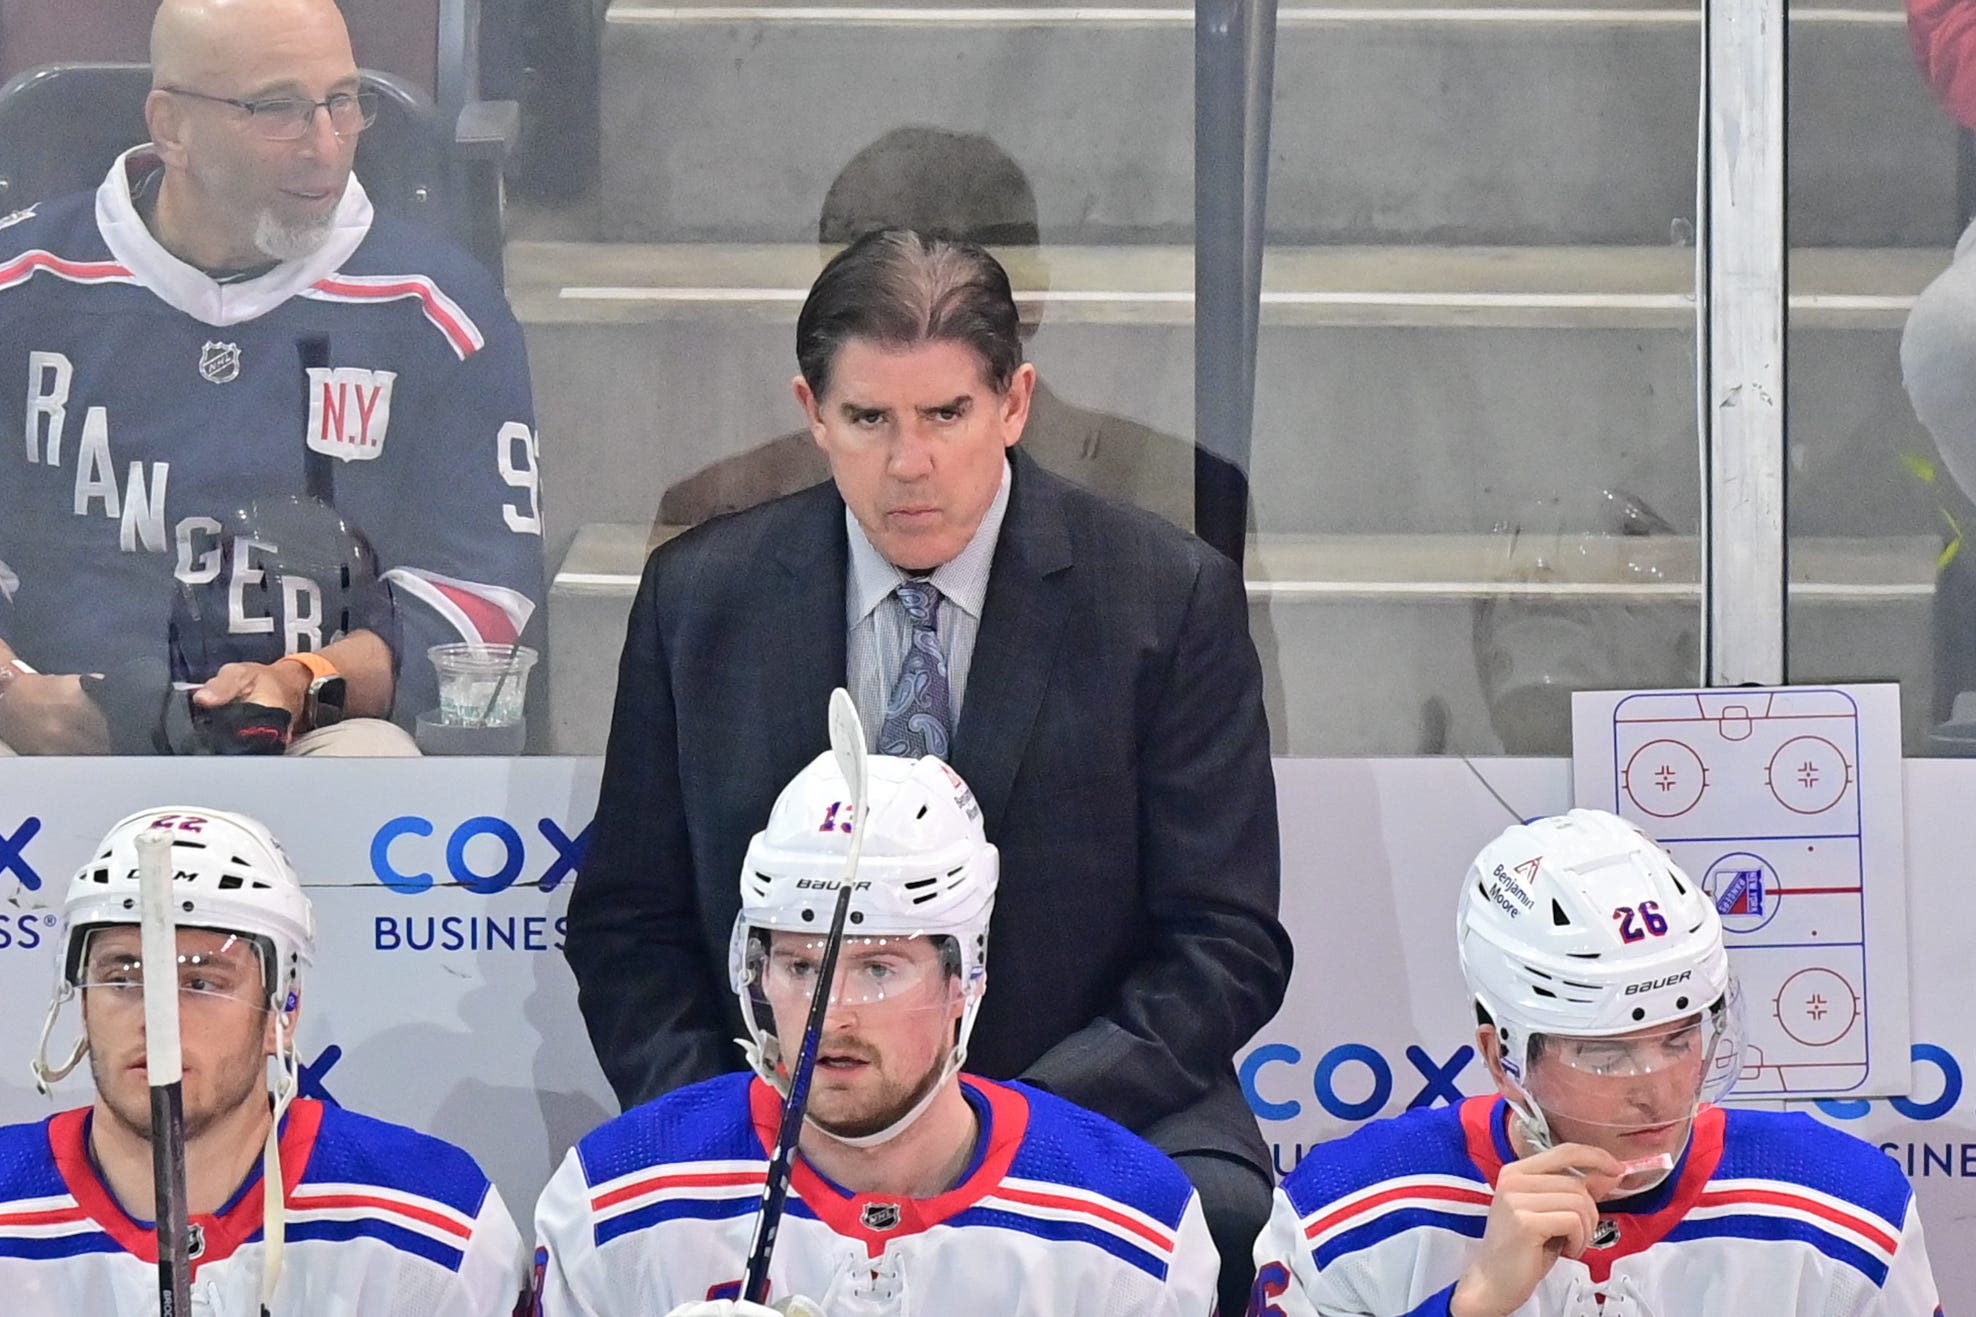 Game 1 lineup: Peter Laviolette-led Rangers prepared for biggest test yet